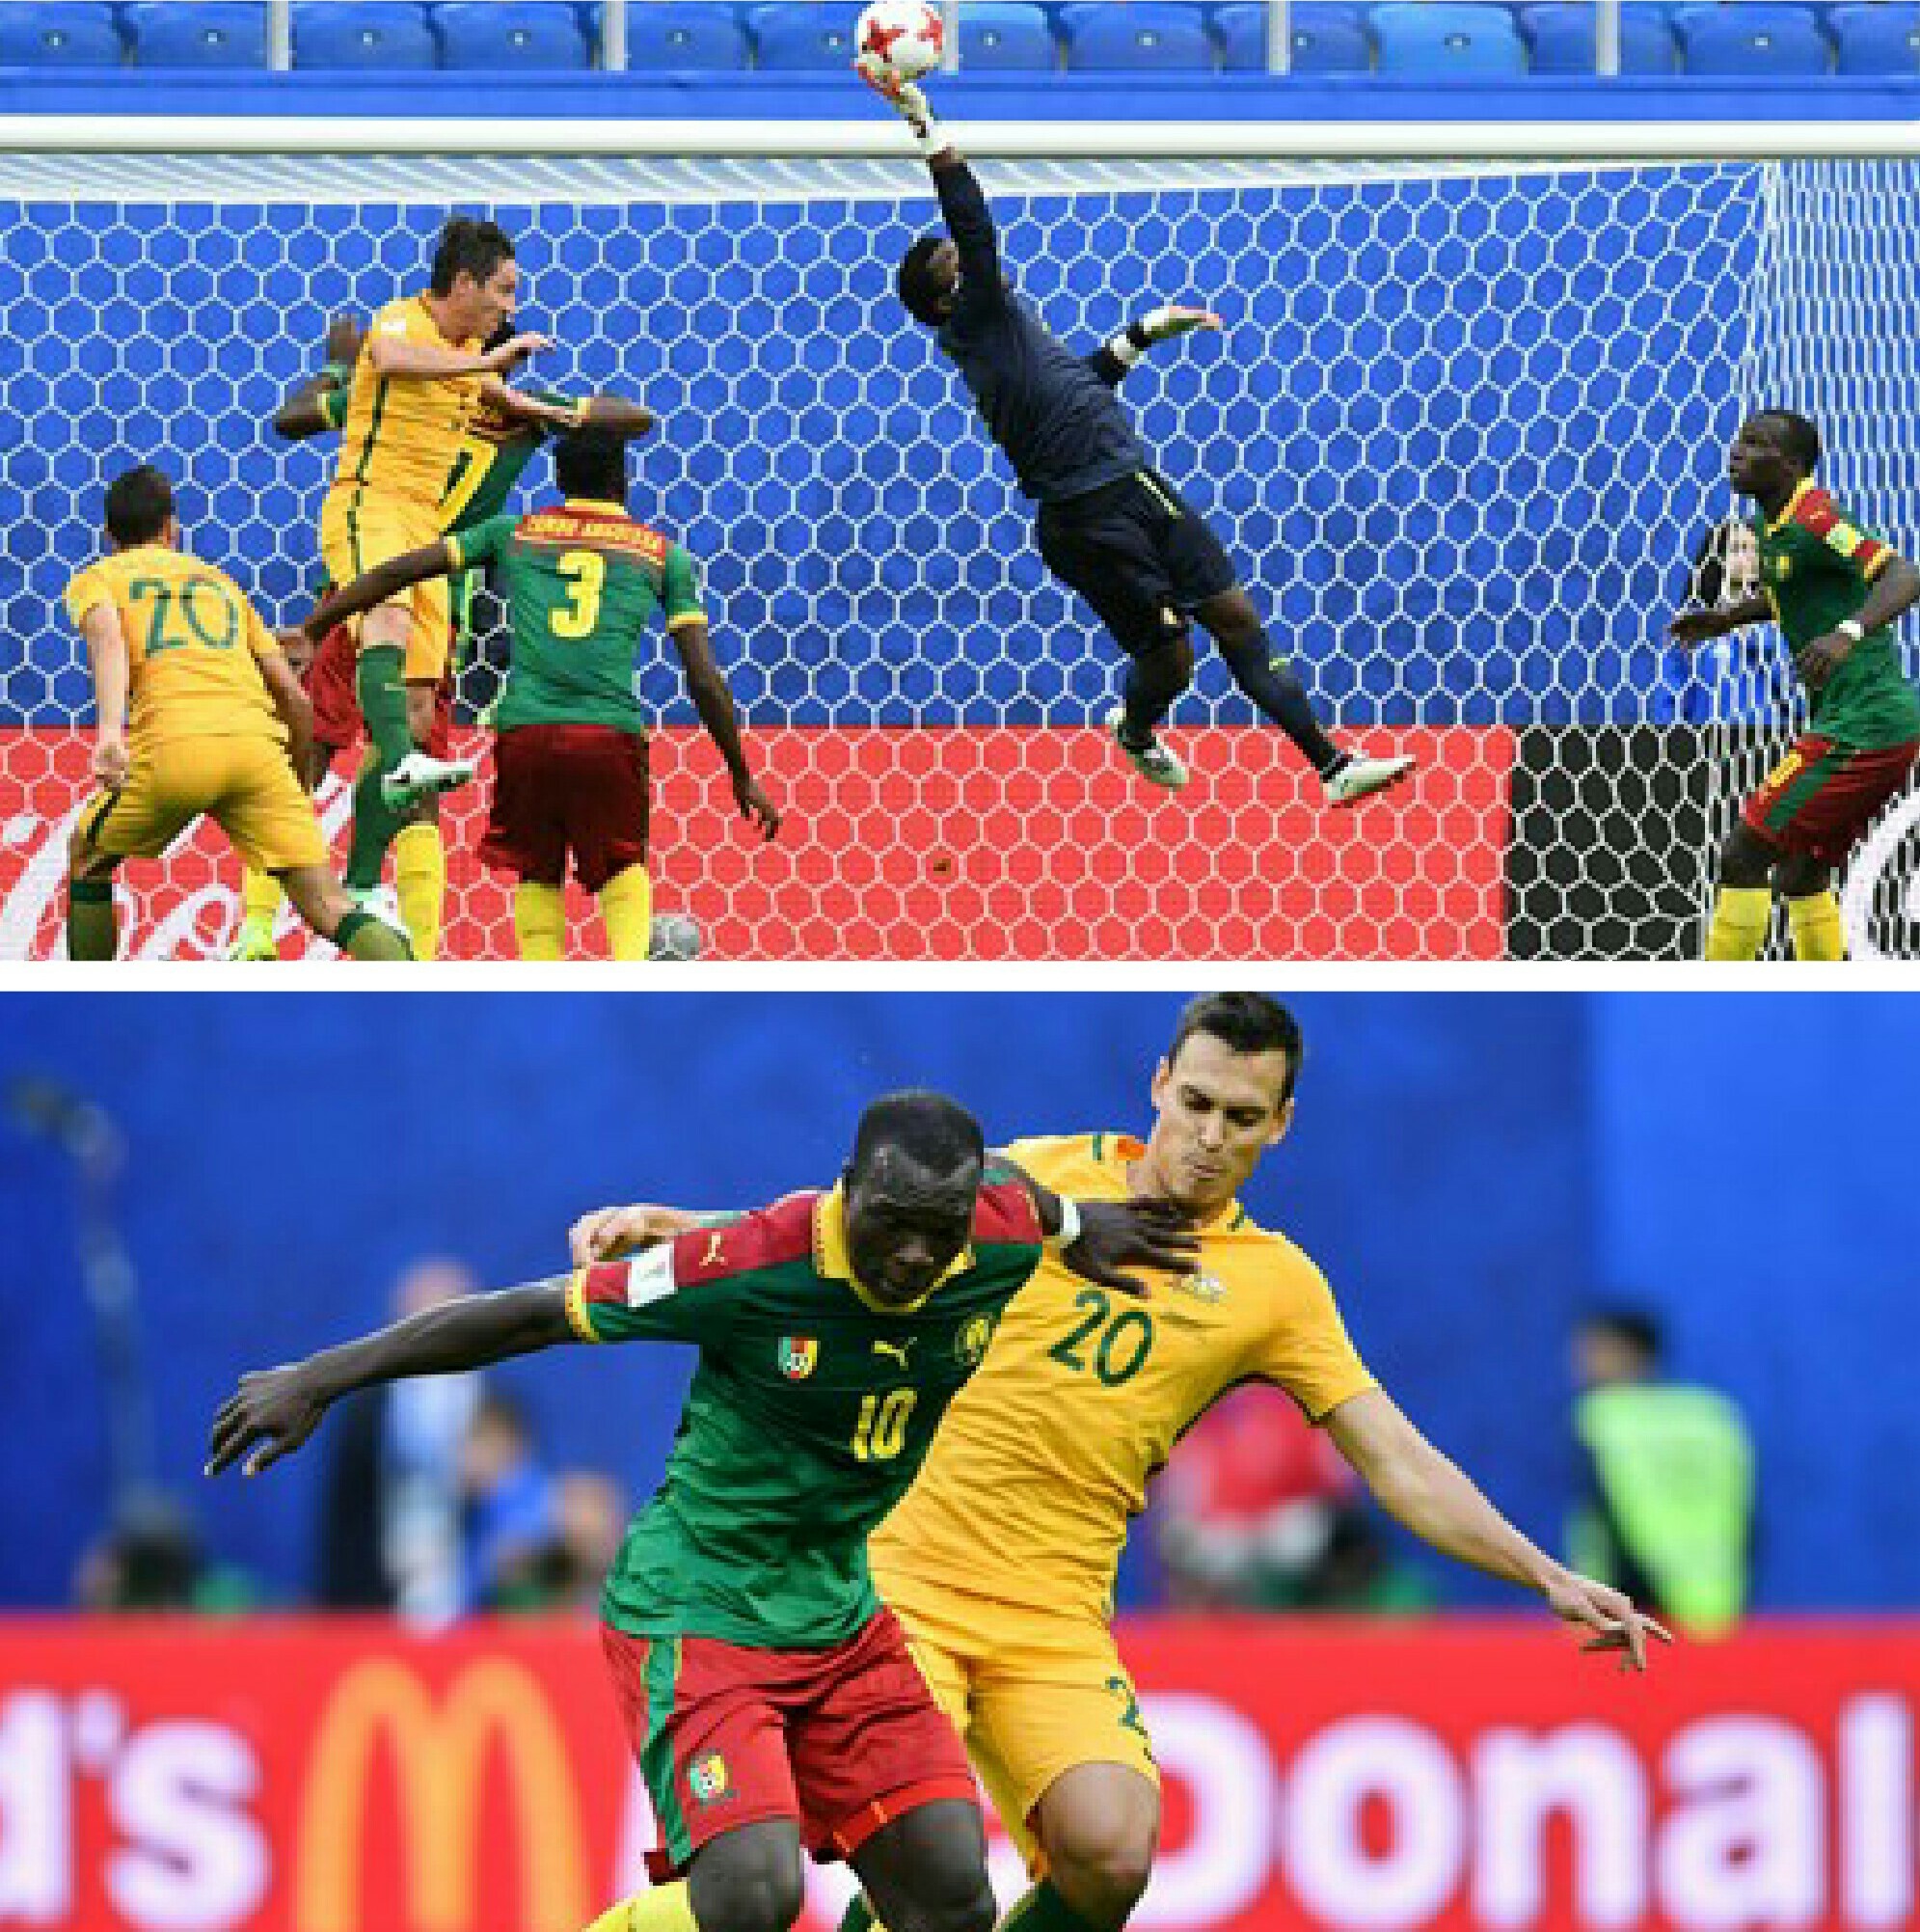 Confed. Cup: Cameroon, Australia Share The Spoils In 1-1 Draw